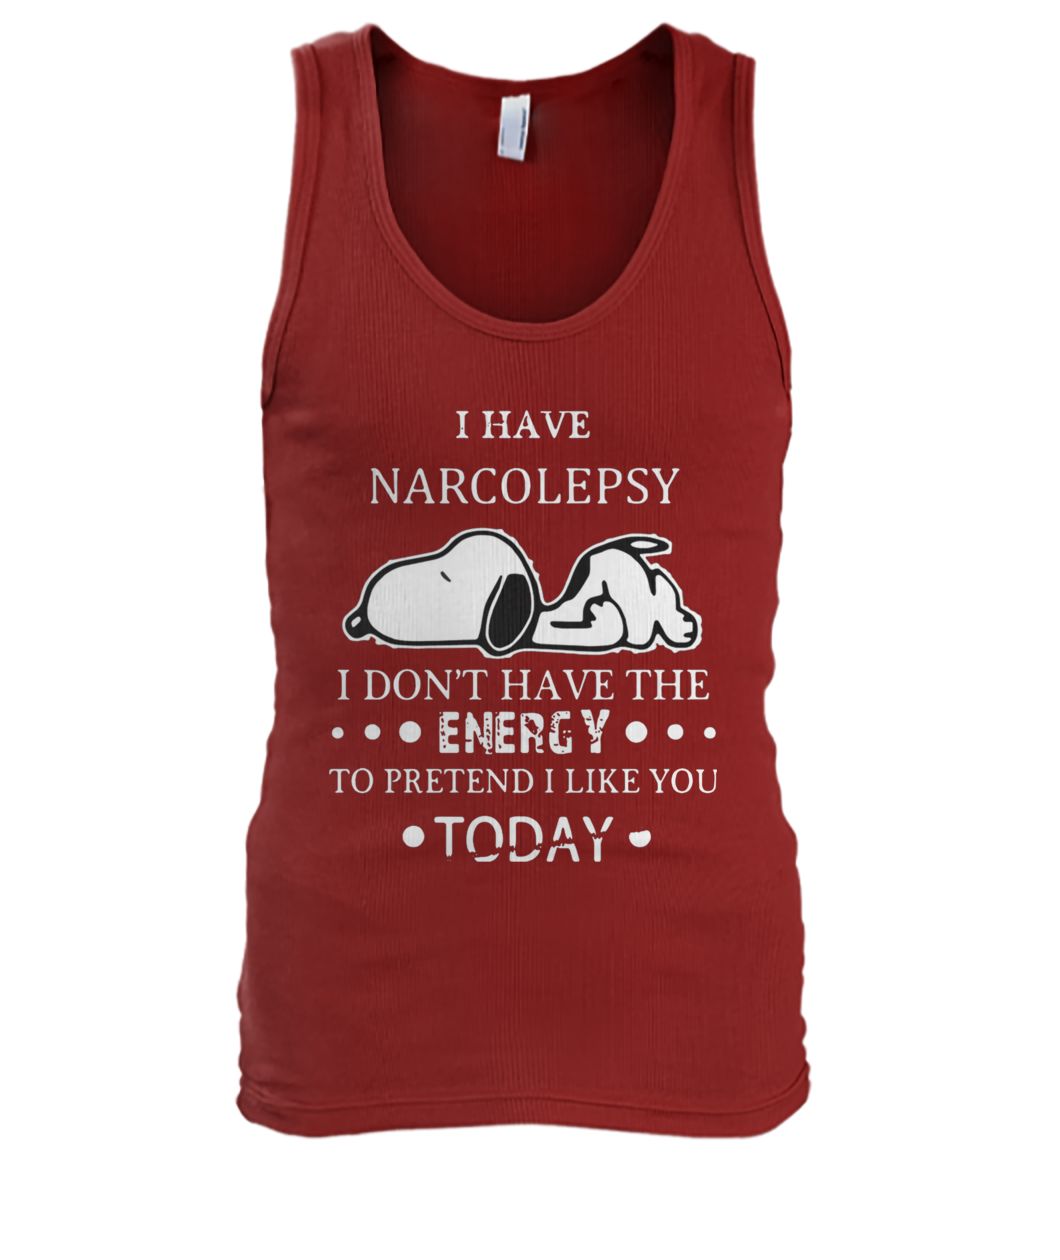 Snoopy I have narcolepsy I don't have the energy to pretend I like you today men's tank top